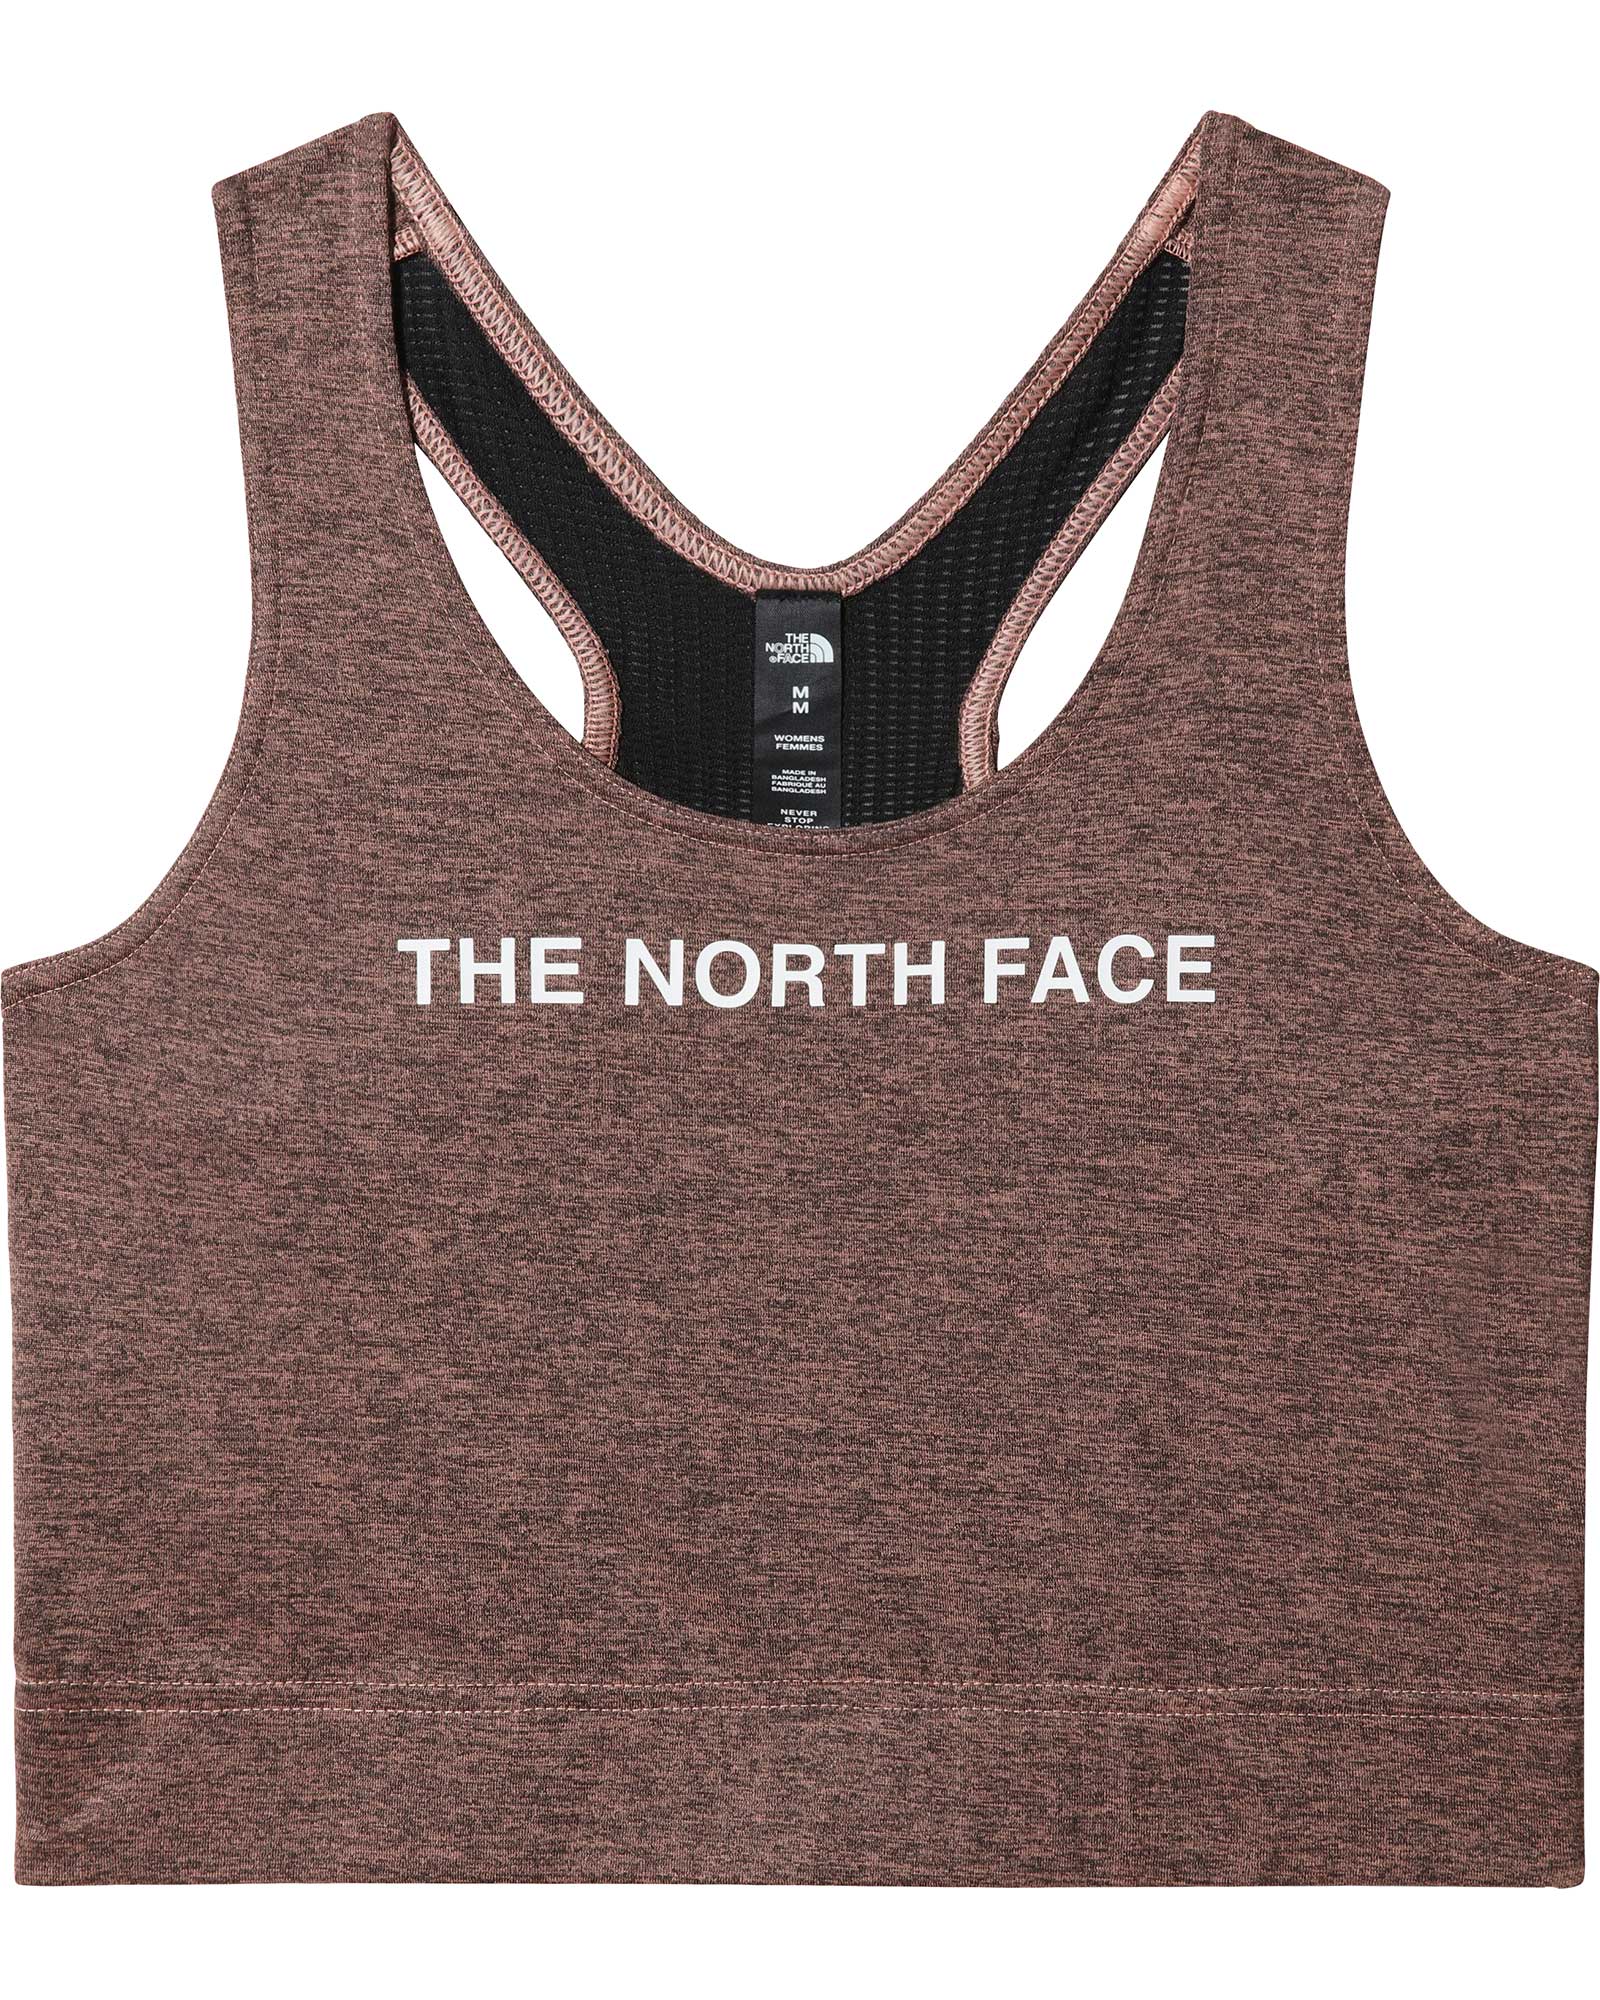 The North Face MA Women’s Tanklette - Rose Dawn Heather S